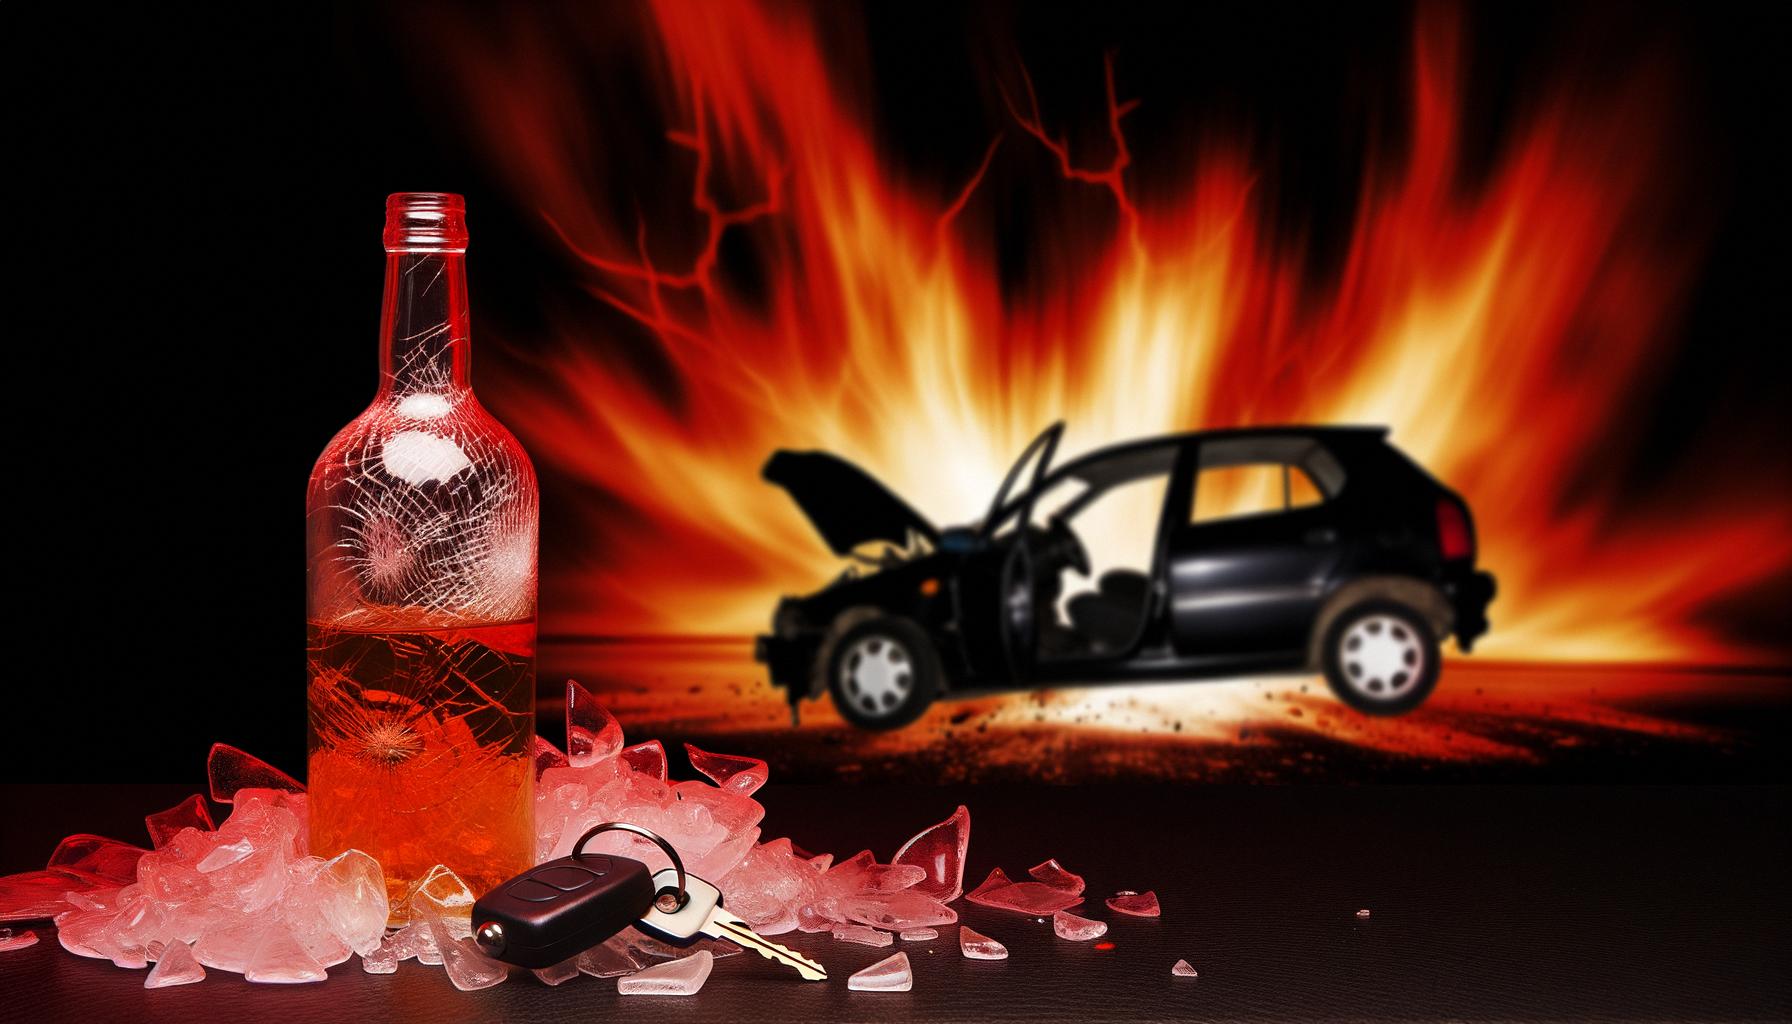 Drunk driving leads to multiple deaths